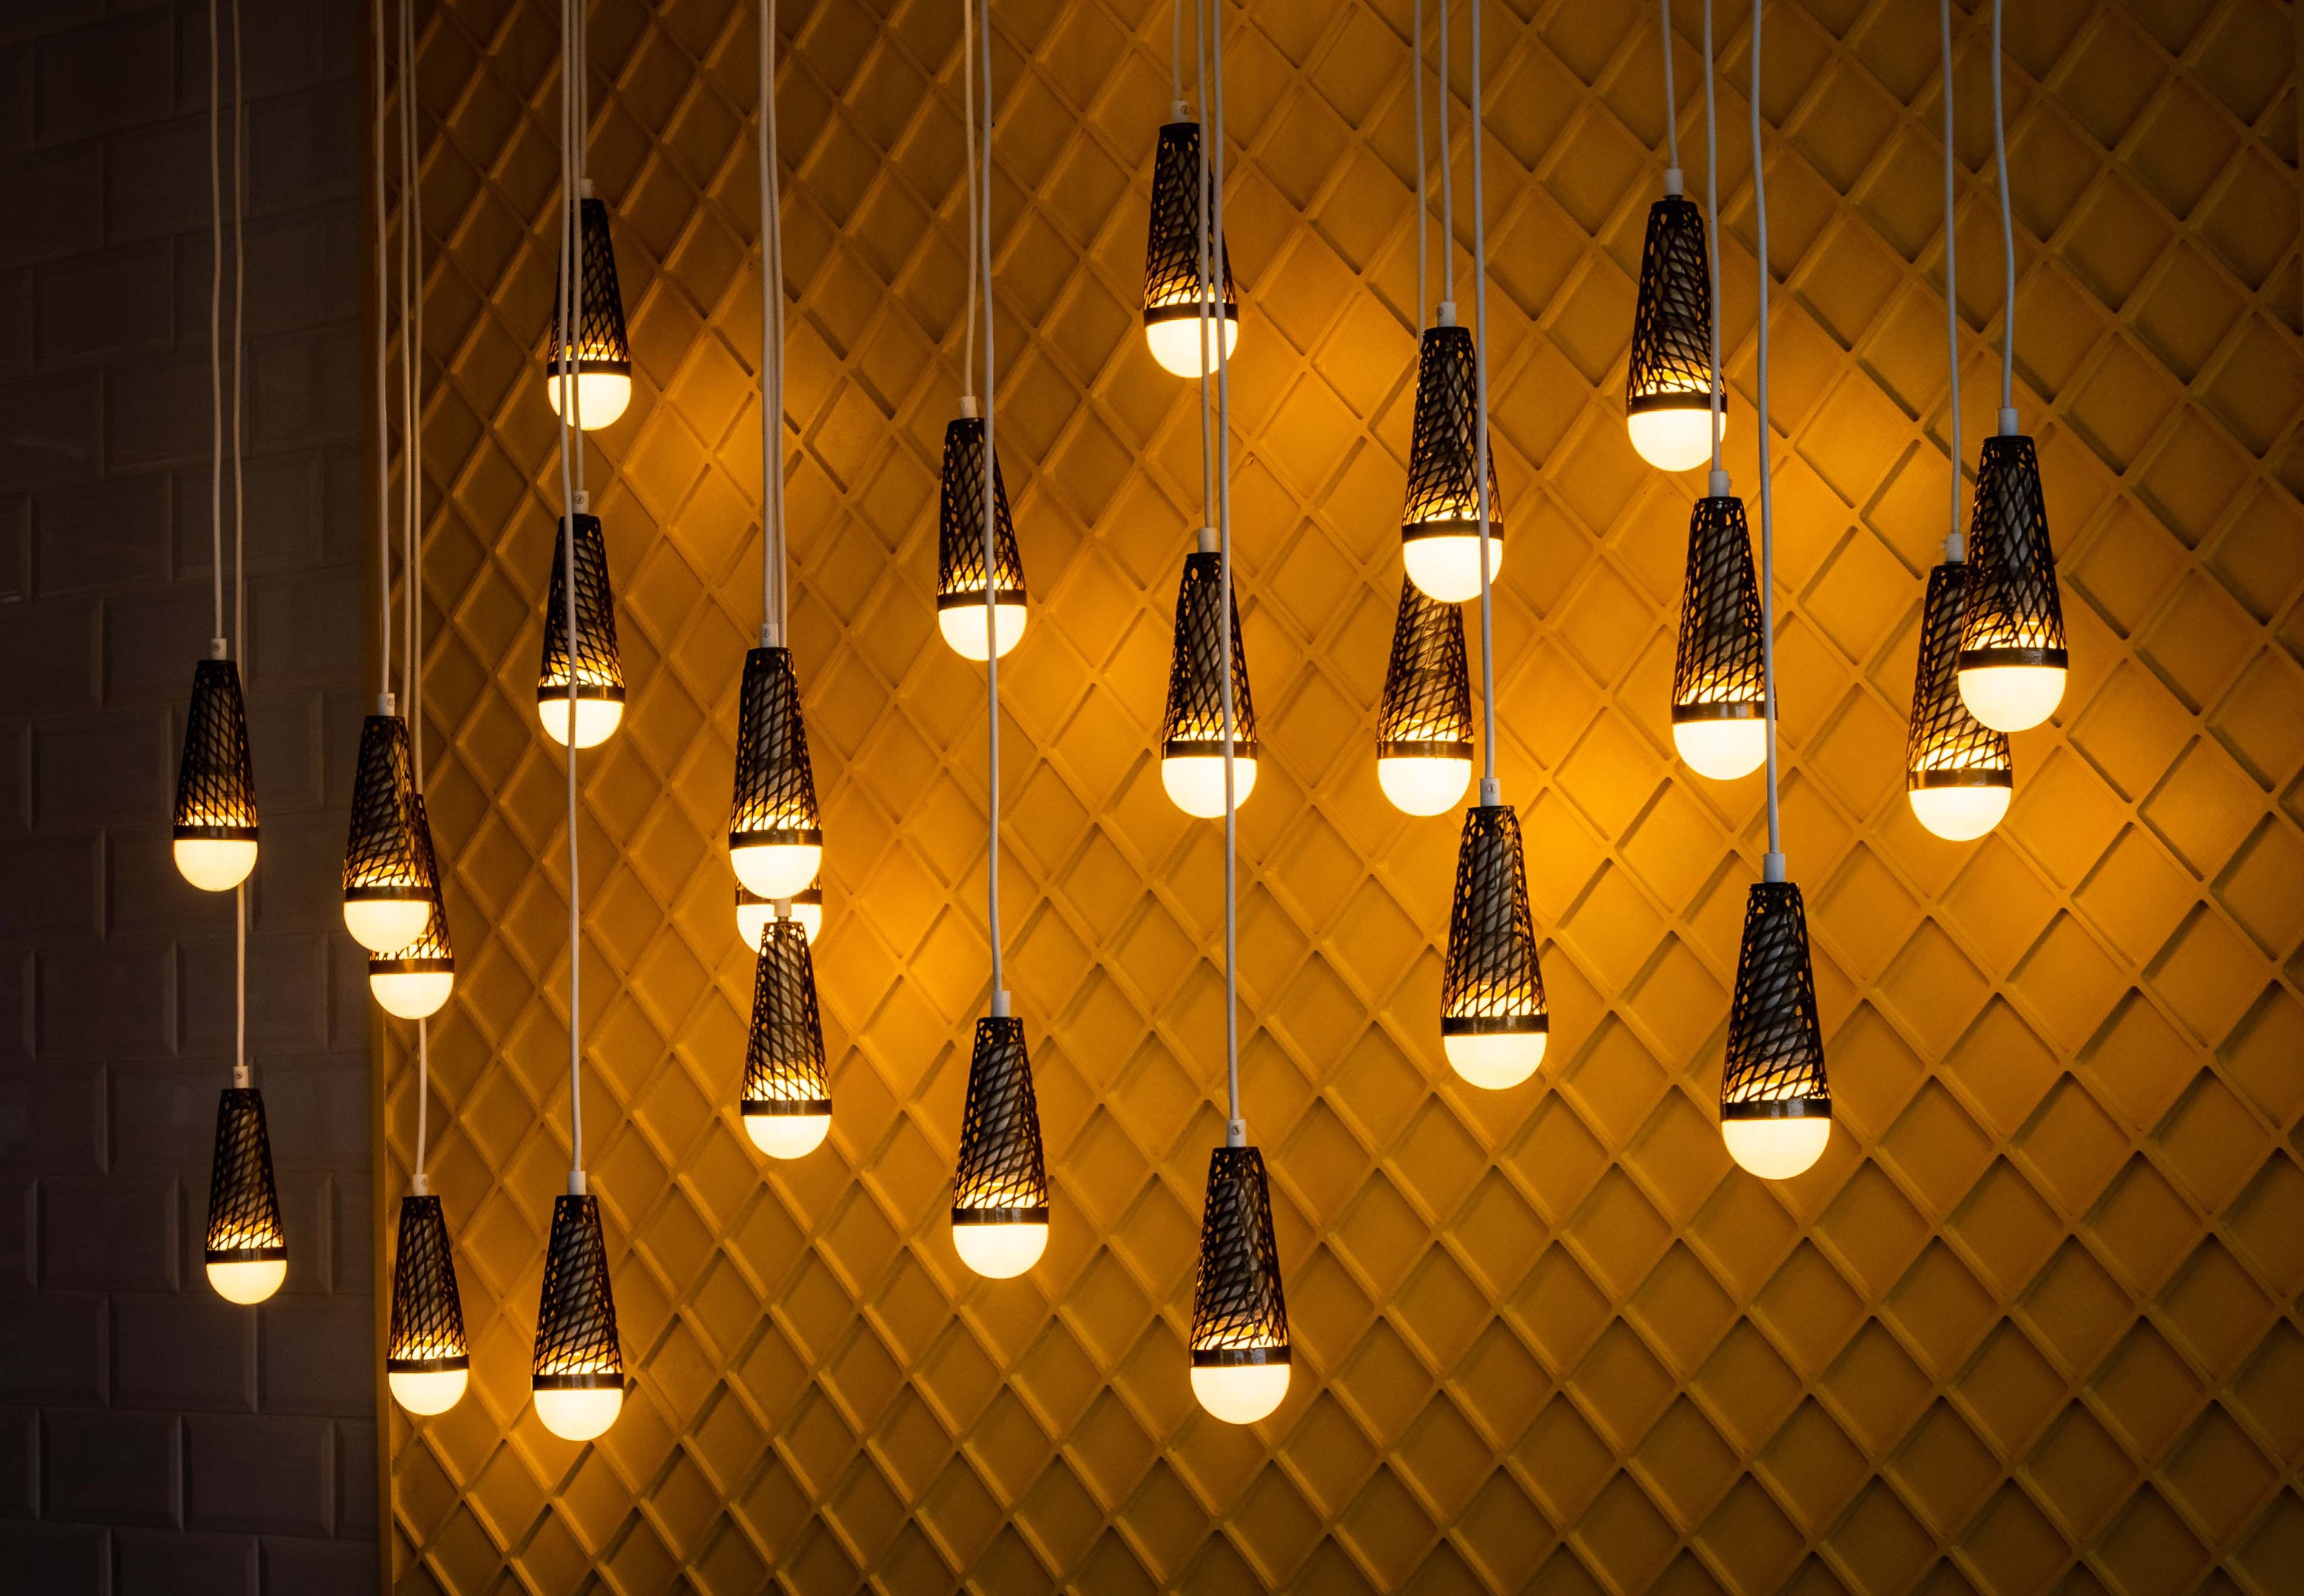 Shine Bright This Season: The Top LED Lighting Trends for December